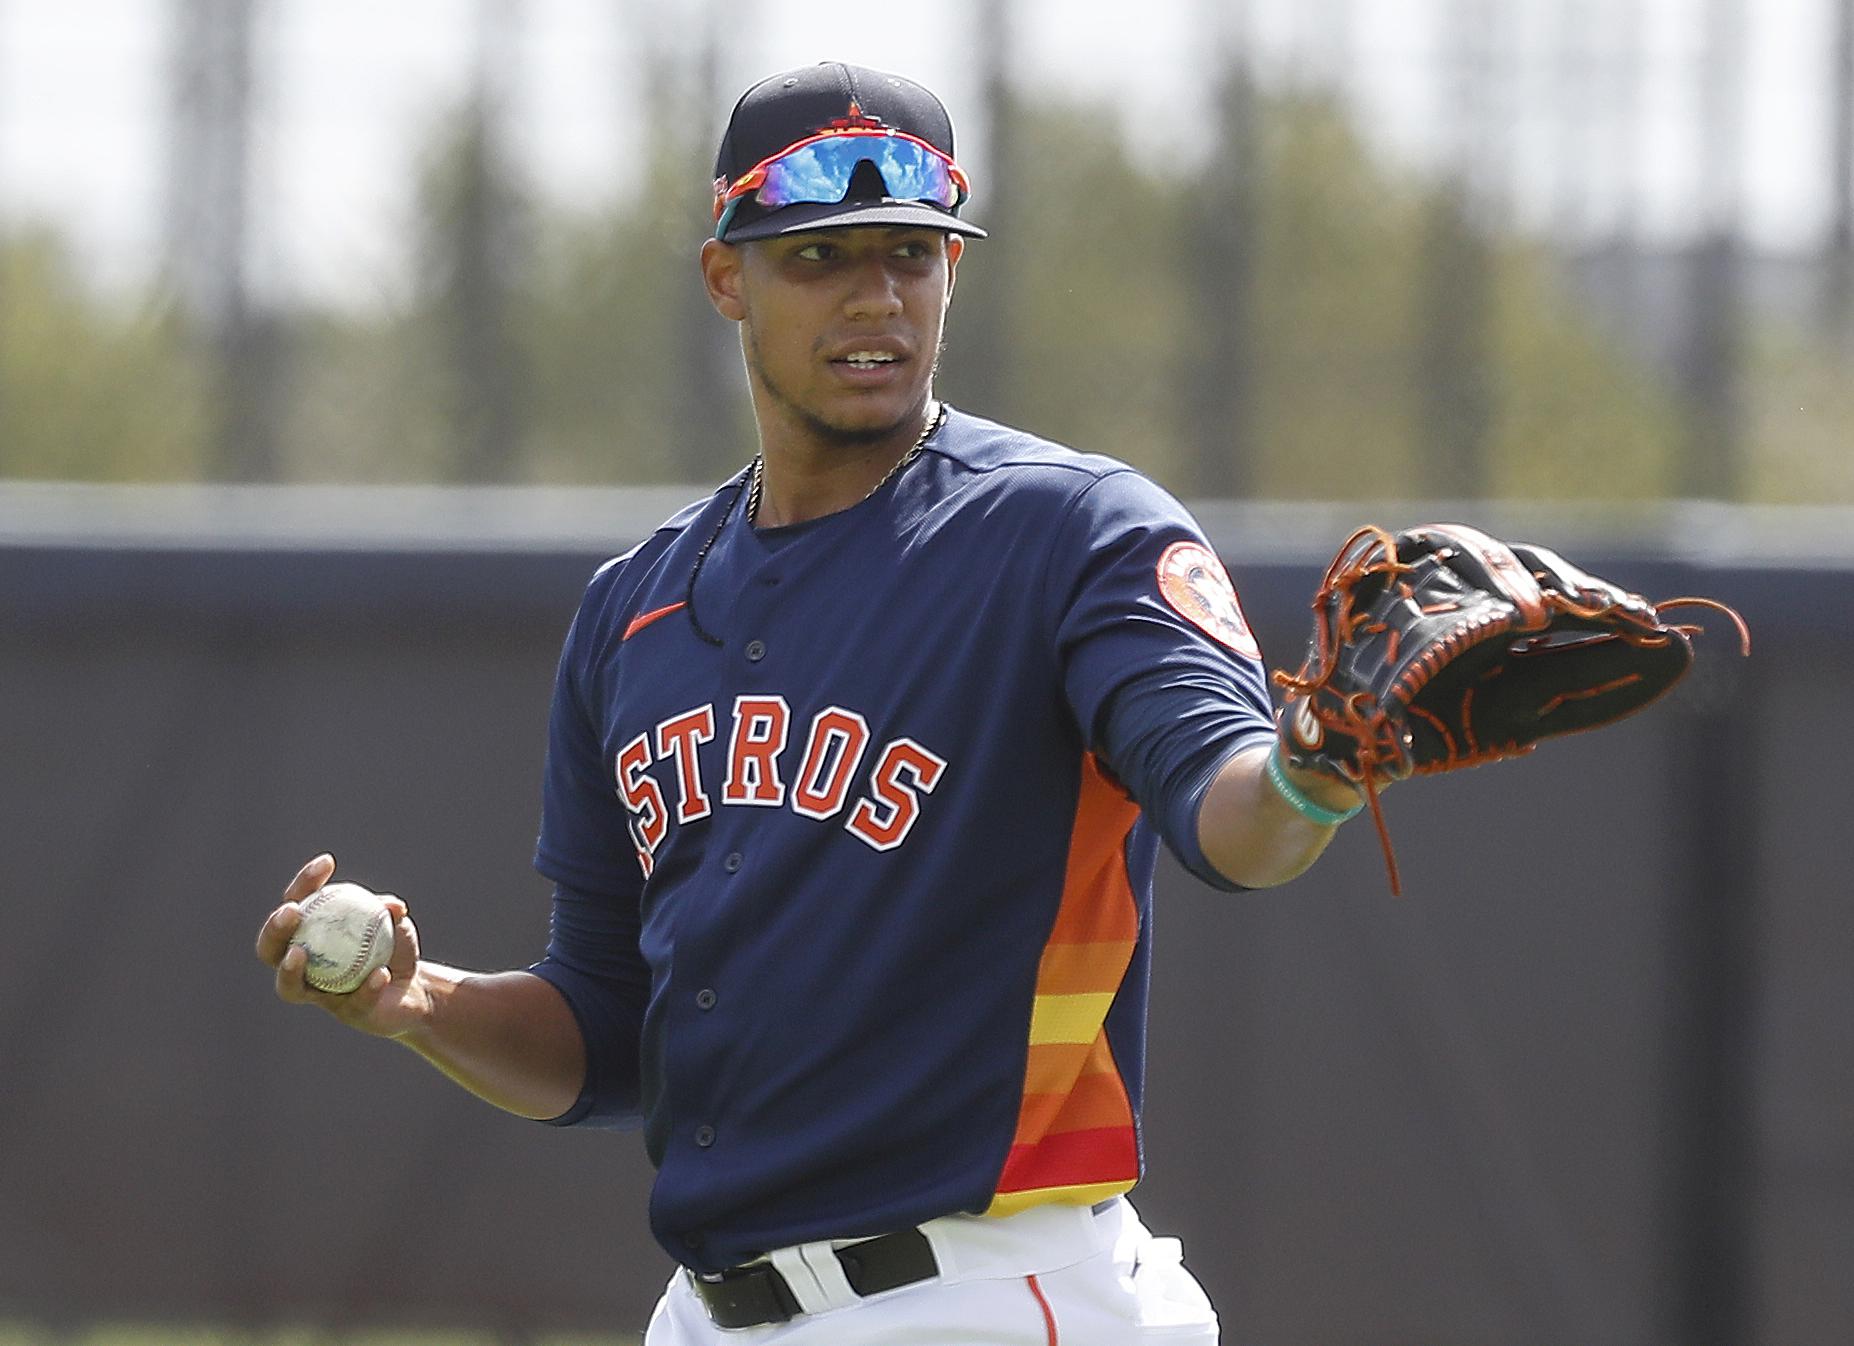 After slow start to spring, Astros' Bryan Abreu could use a strong